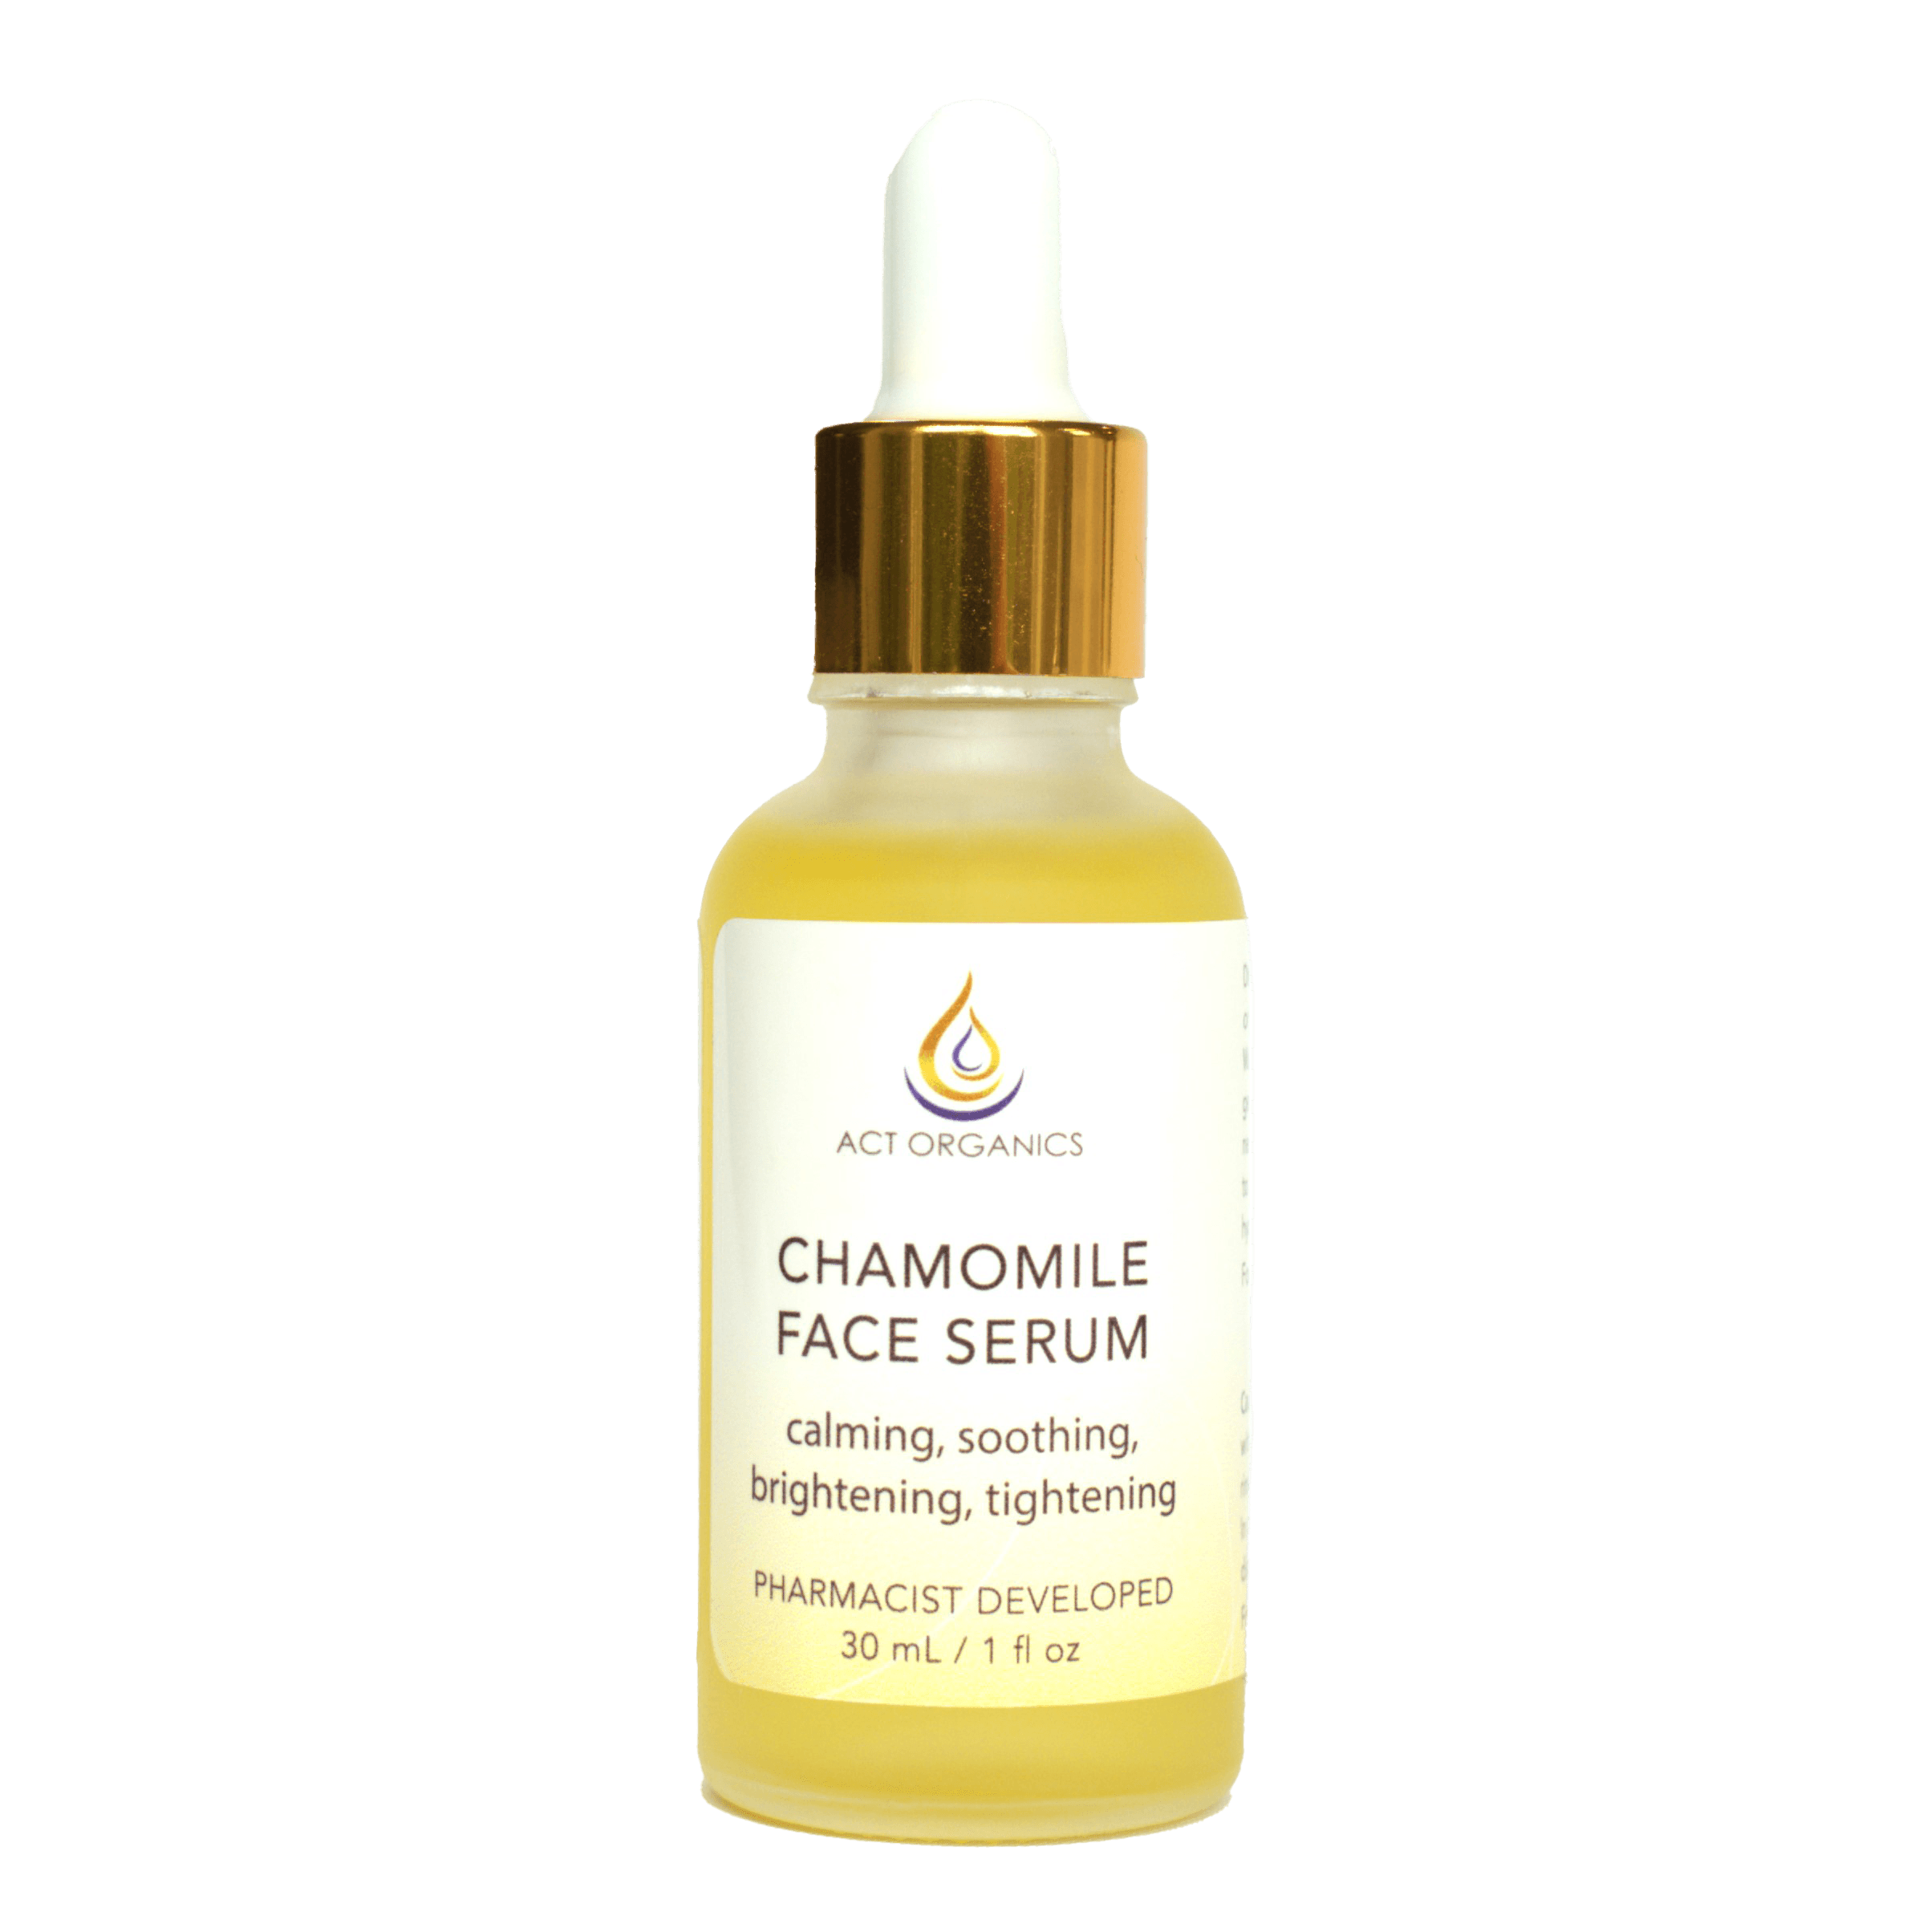 Calming and Soothing Face Serum, Lightweight and Moisturizing, All-Natural with Chamomile - ACT ORGANICS